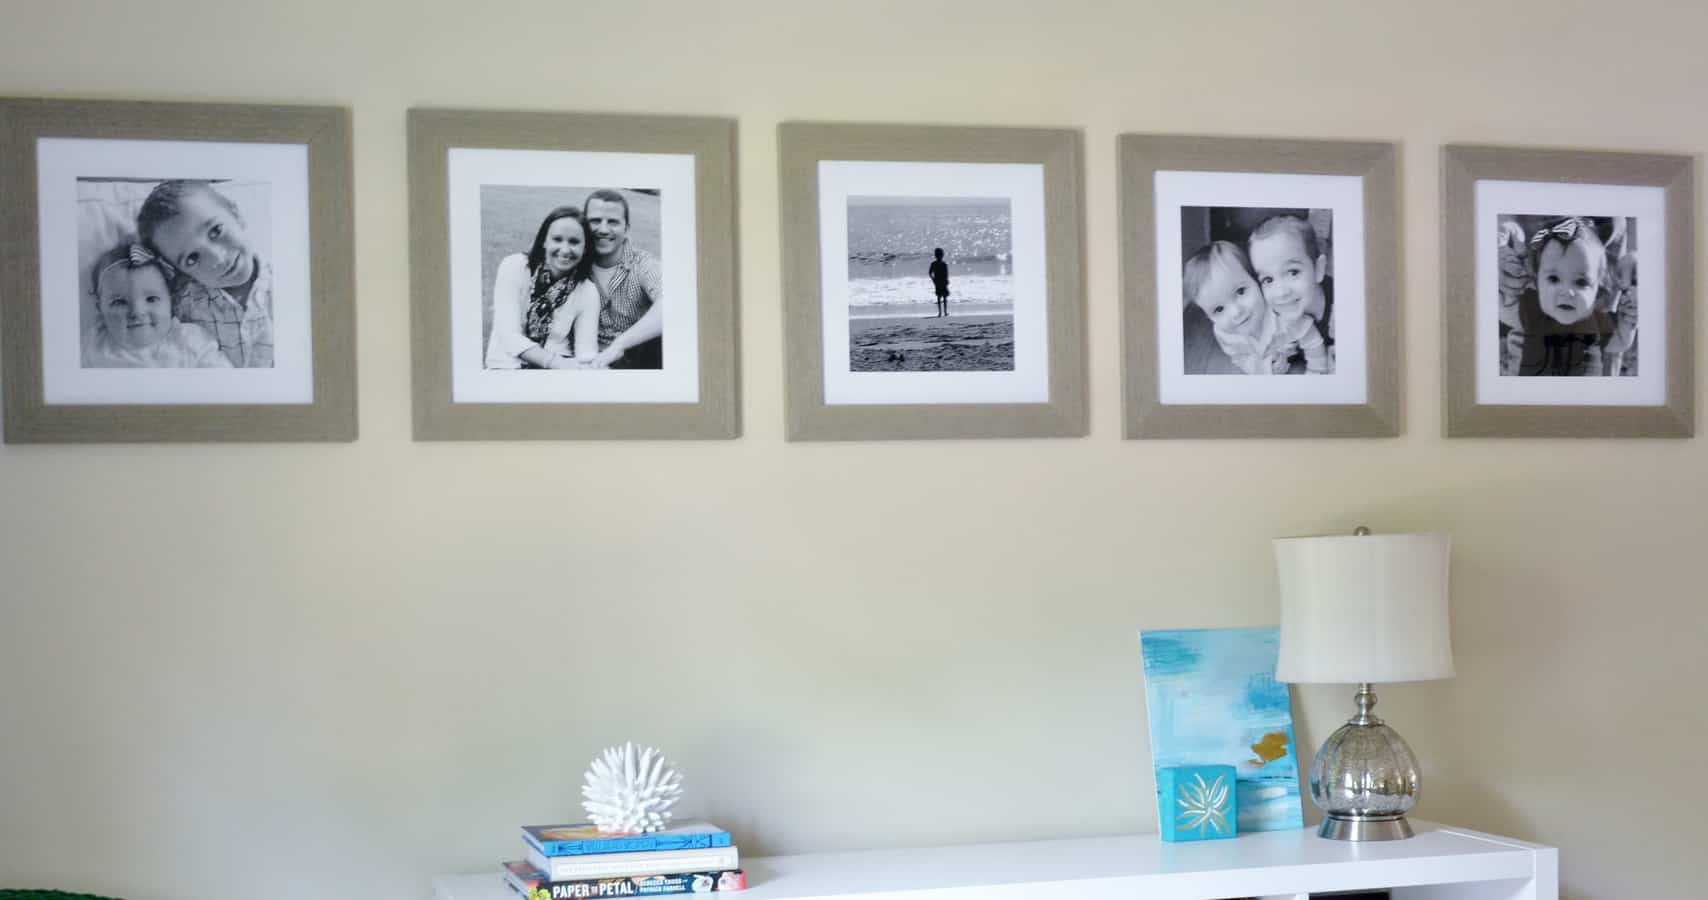 What Staples Do You Use for Picture Frames?